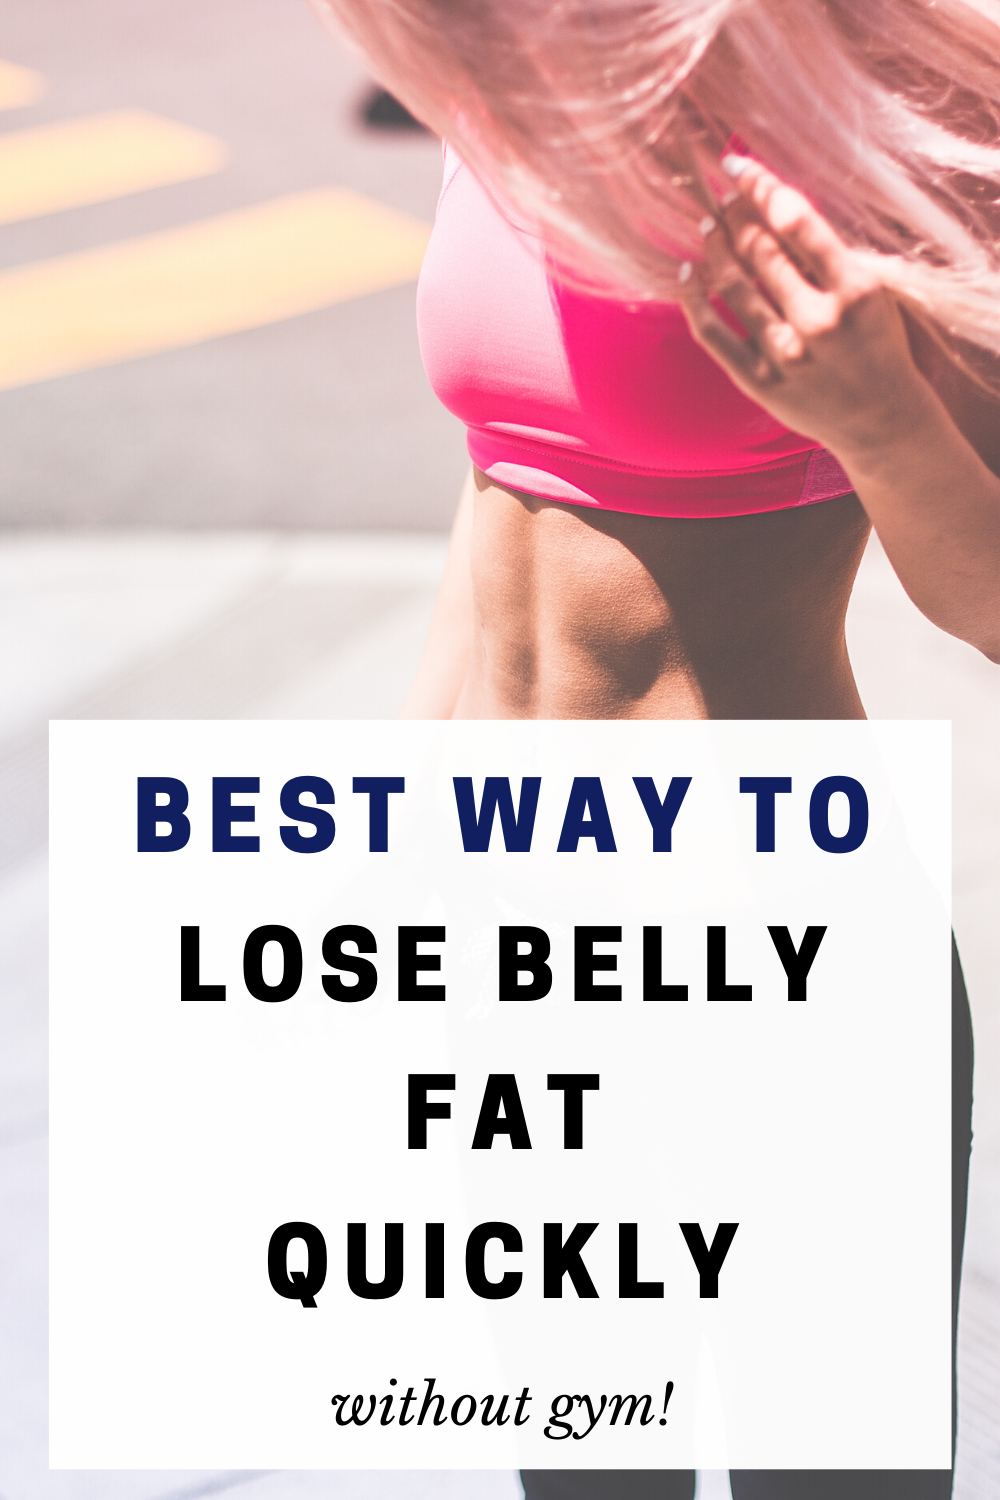 Marie Levato: BEST WAY TO LOSE BELLY FAT QUICKLY WITHOUT GYM